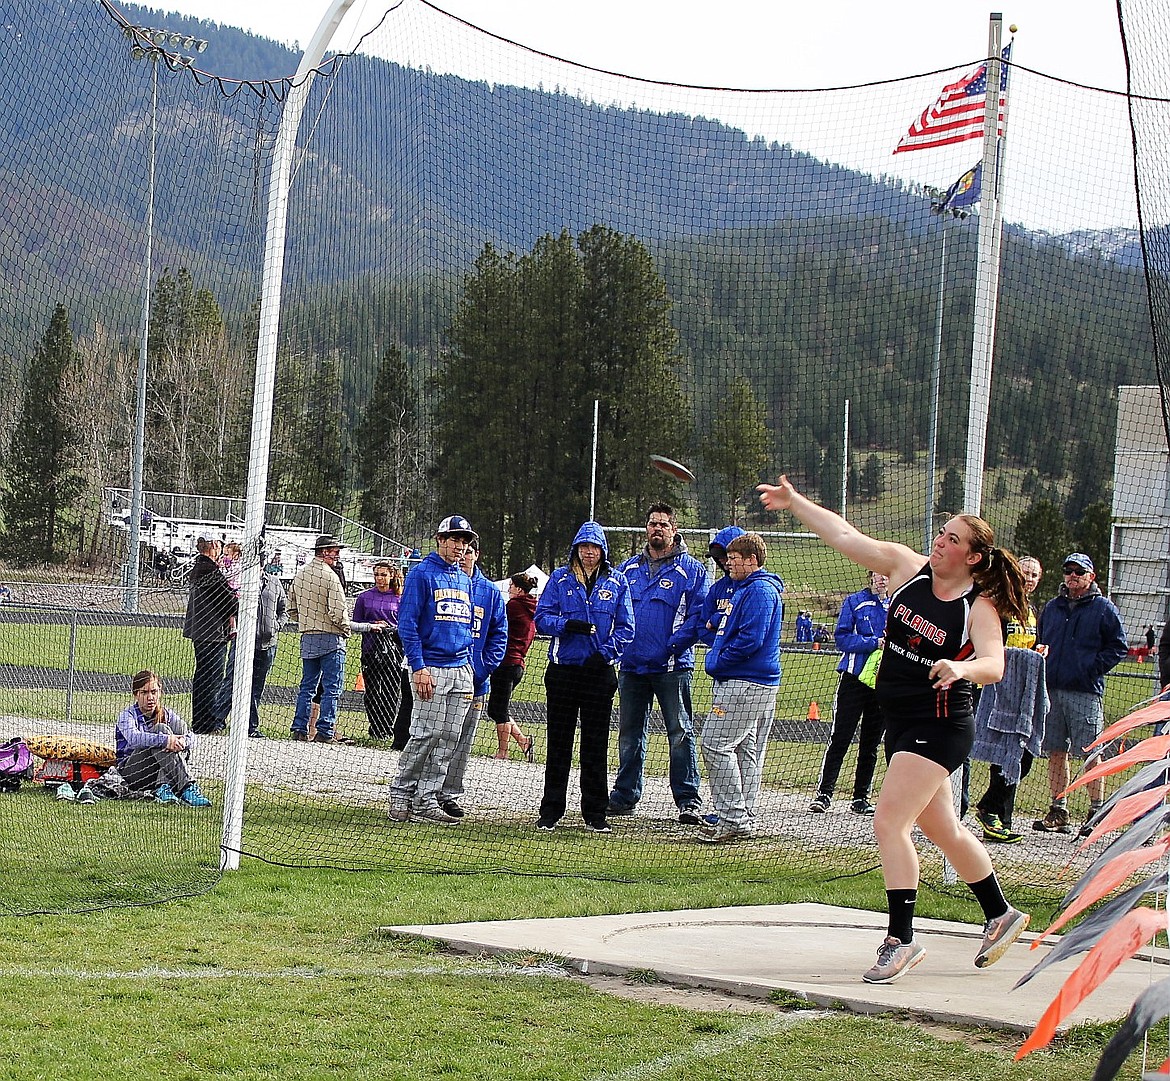 HAILEY COE of Plains lets it fly during the discus event at the Frenchtown track meet this weekend.